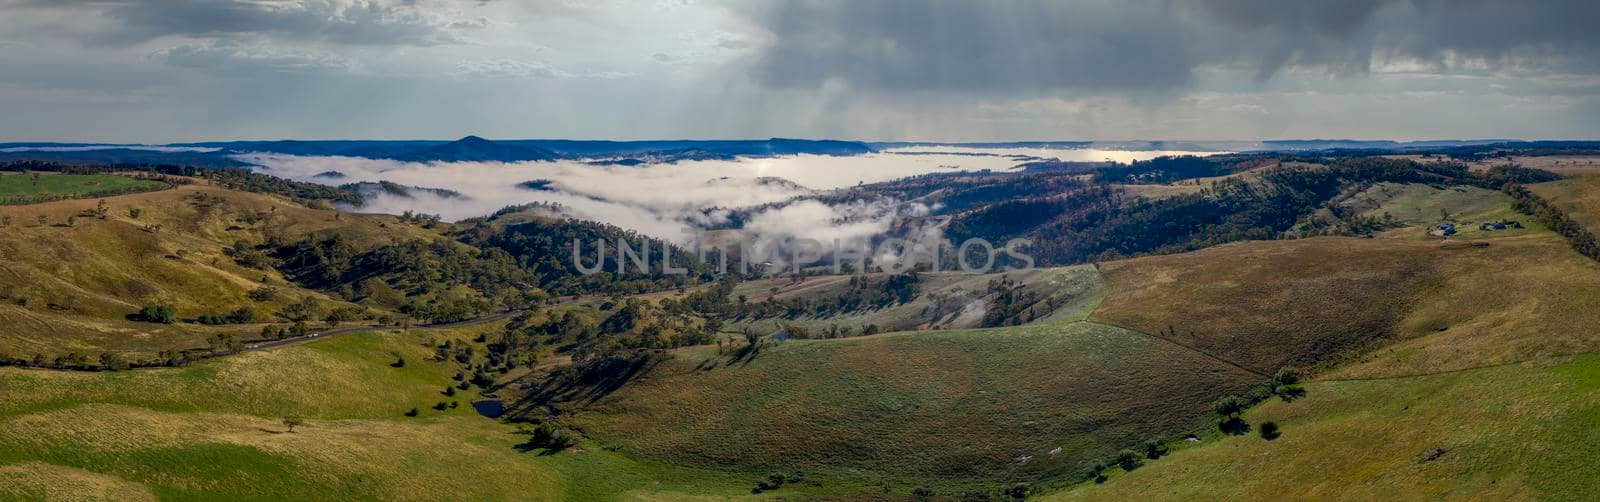 Aerial view of low-level clouds in a large green valley in regional Australia by WittkePhotos